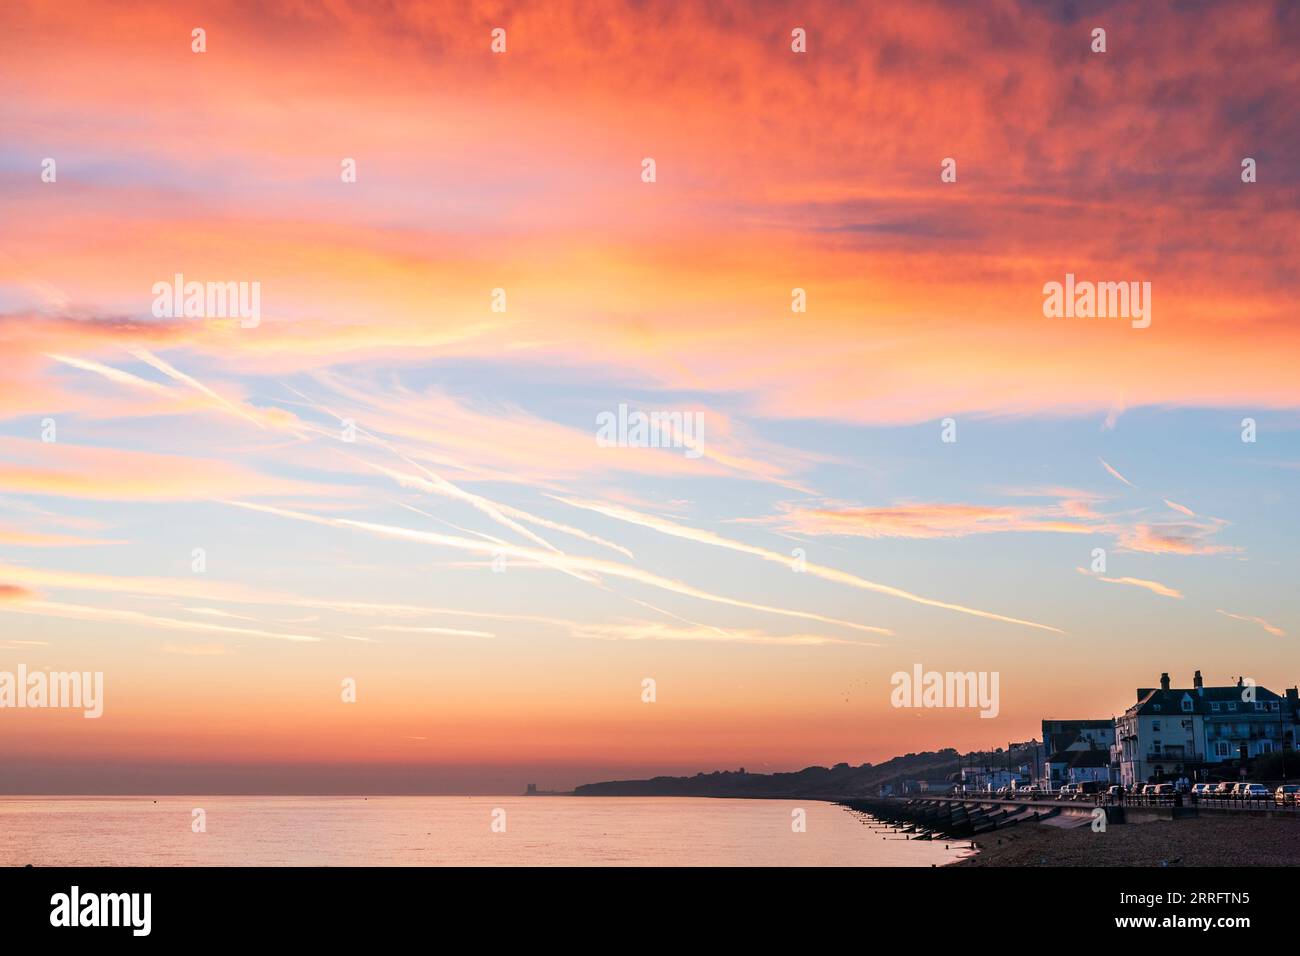 The dawn sky over the seafront at Herne Bay on the north Kent Coast. View along beach and seafront houses with the sea and dawn sky, featuring blue sky and orange reddish clouds. Stock Photo